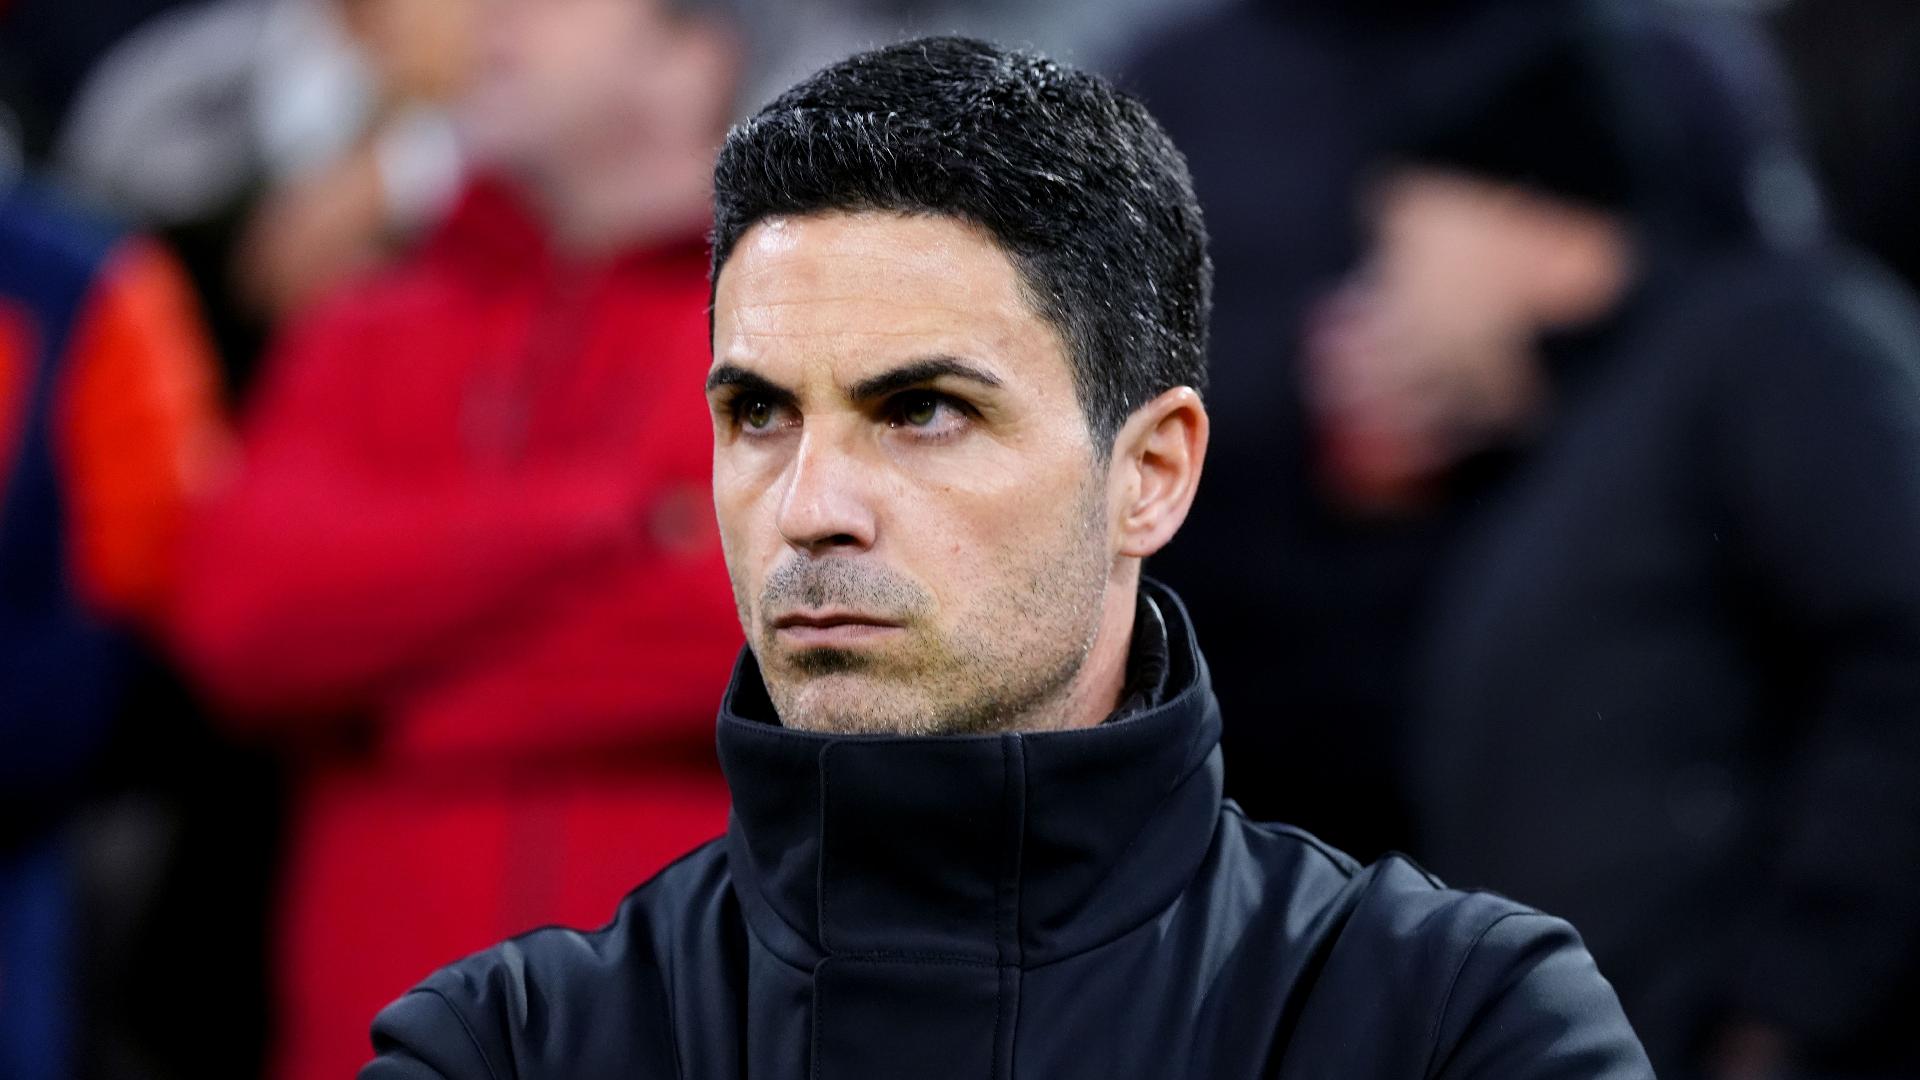 It’s time to show what we’re made of, says Arsenal boss Mikel Arteta